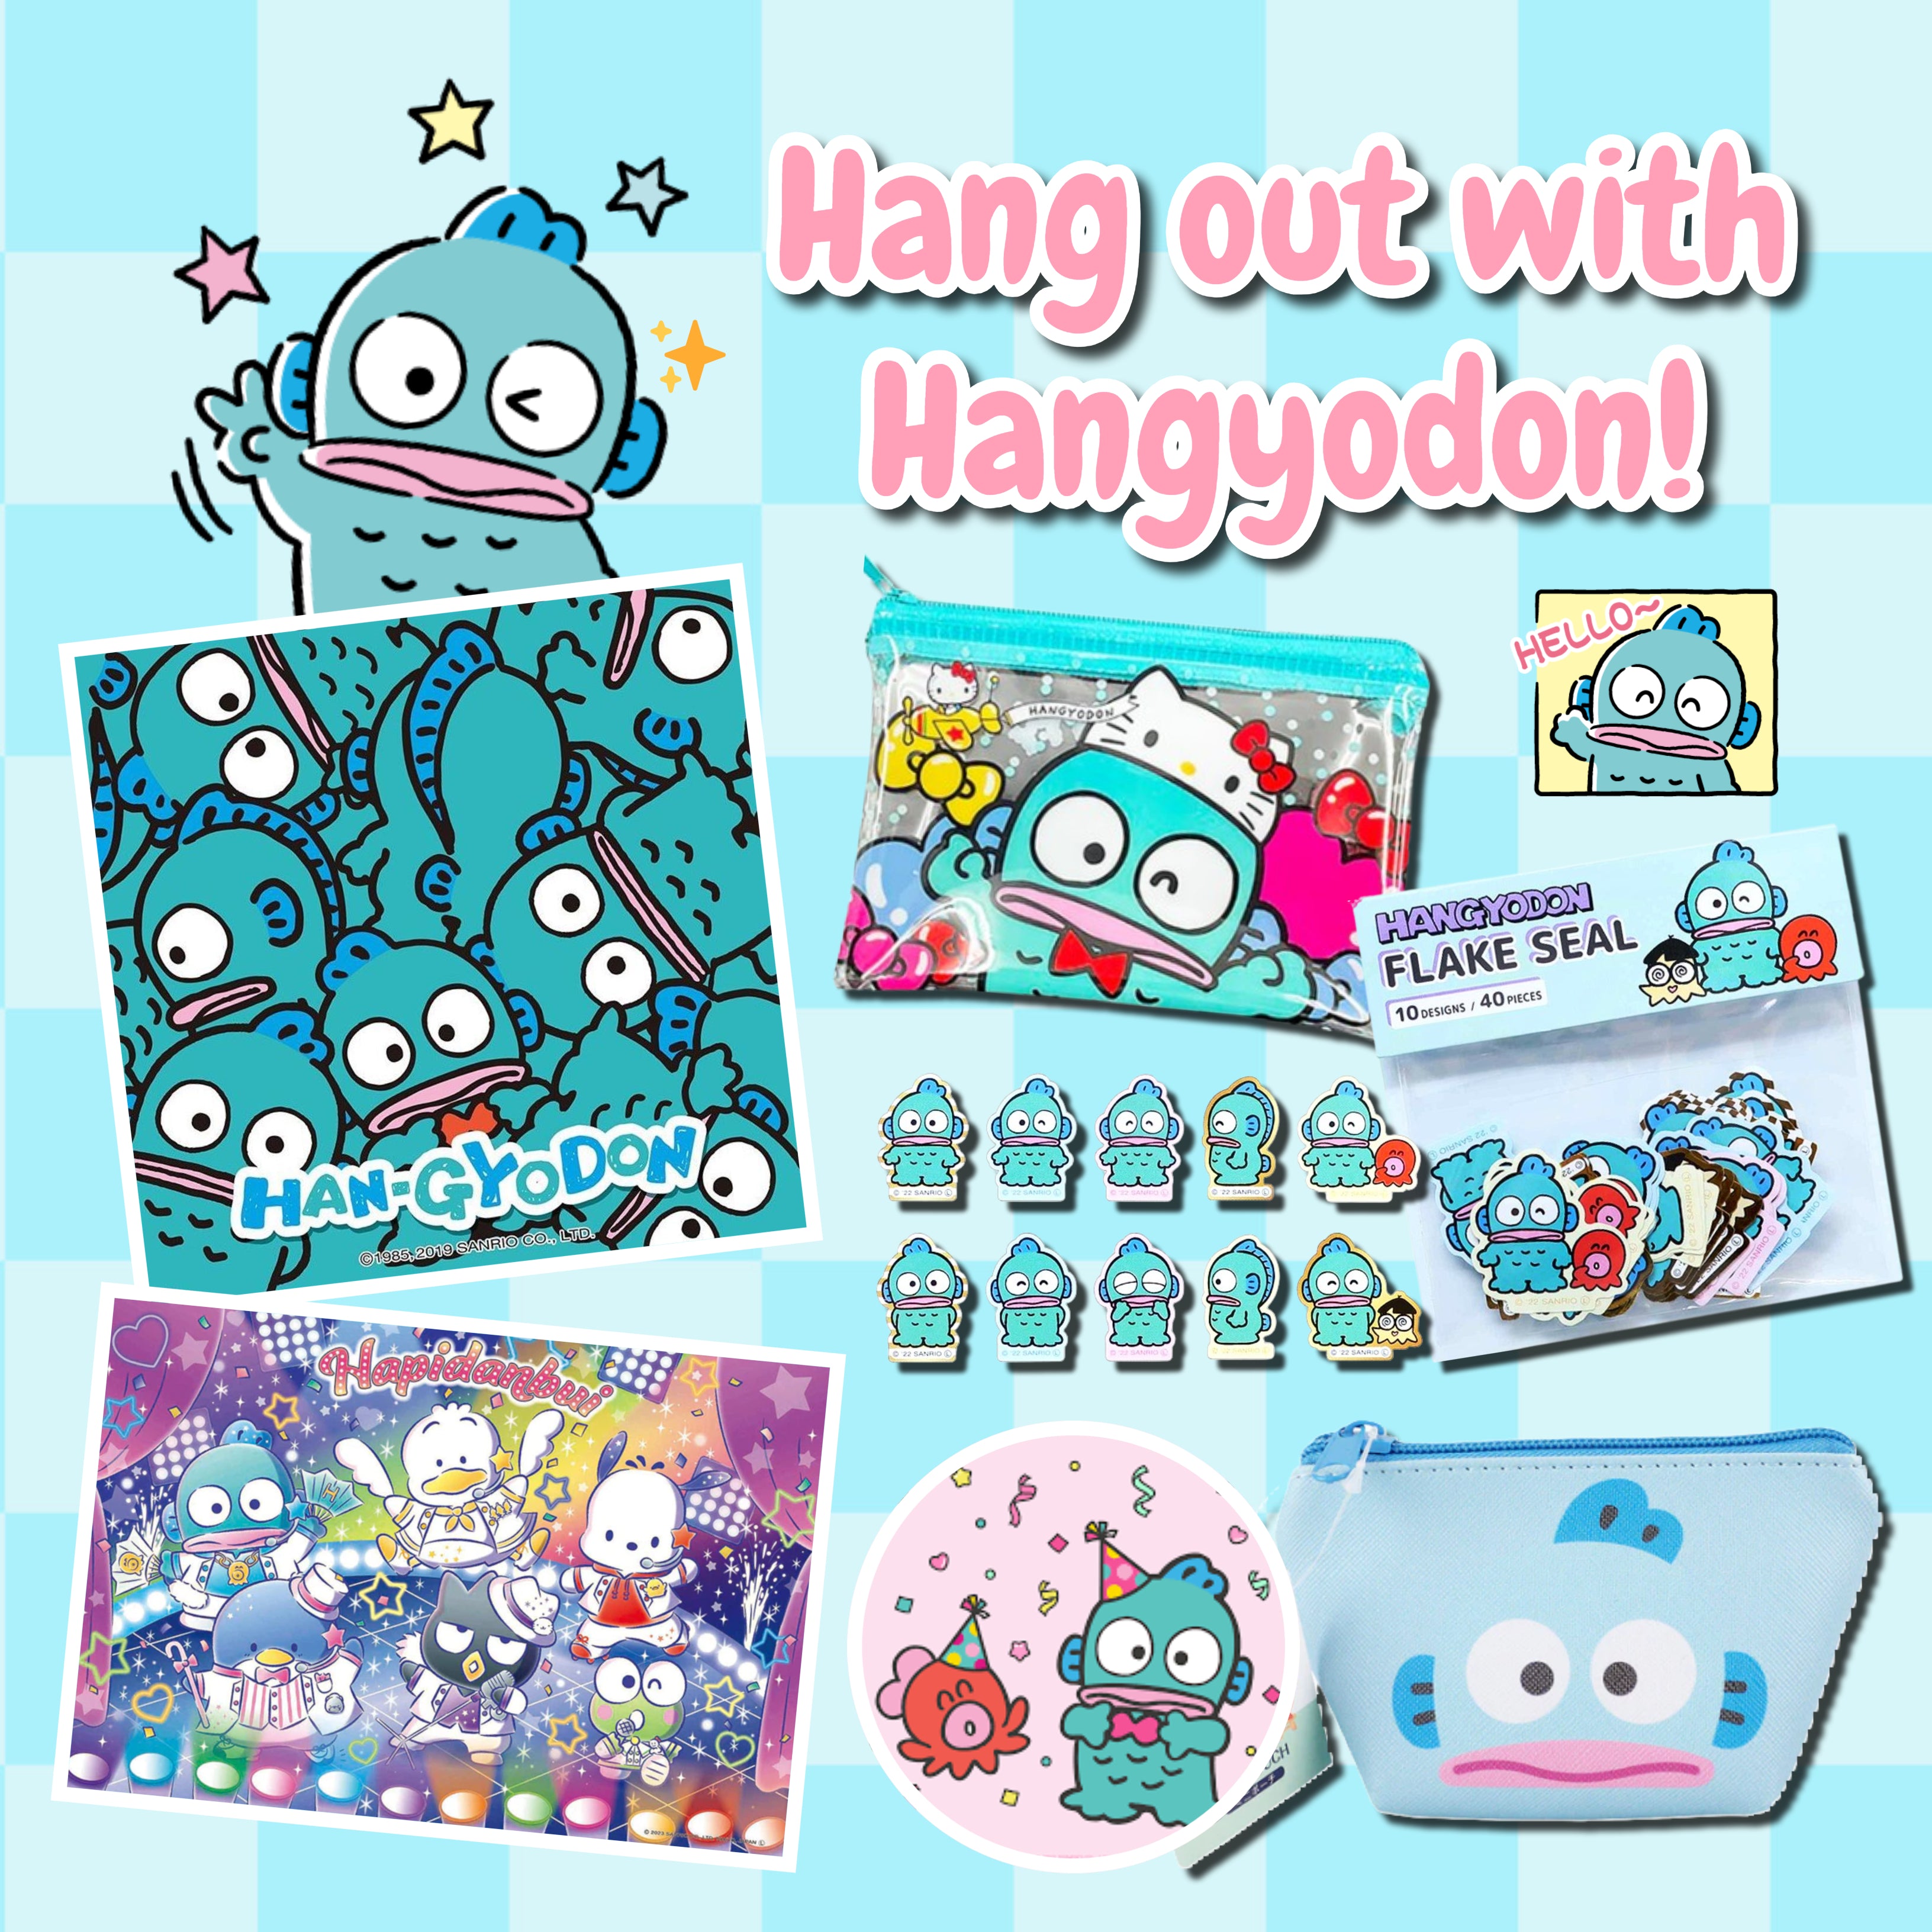 Hang out with Hangyodon!